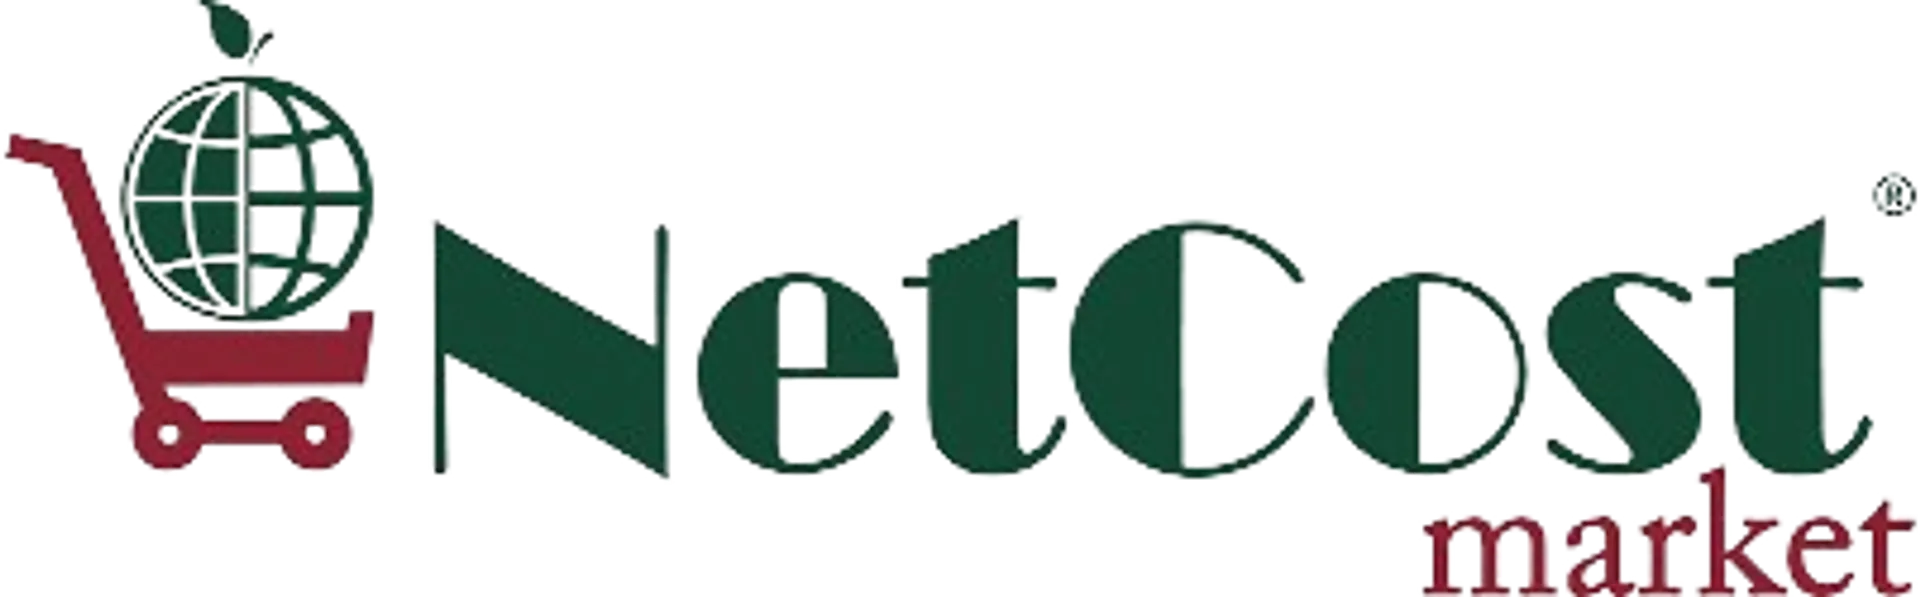 NETCOST MARKET logo. Current weekly ad